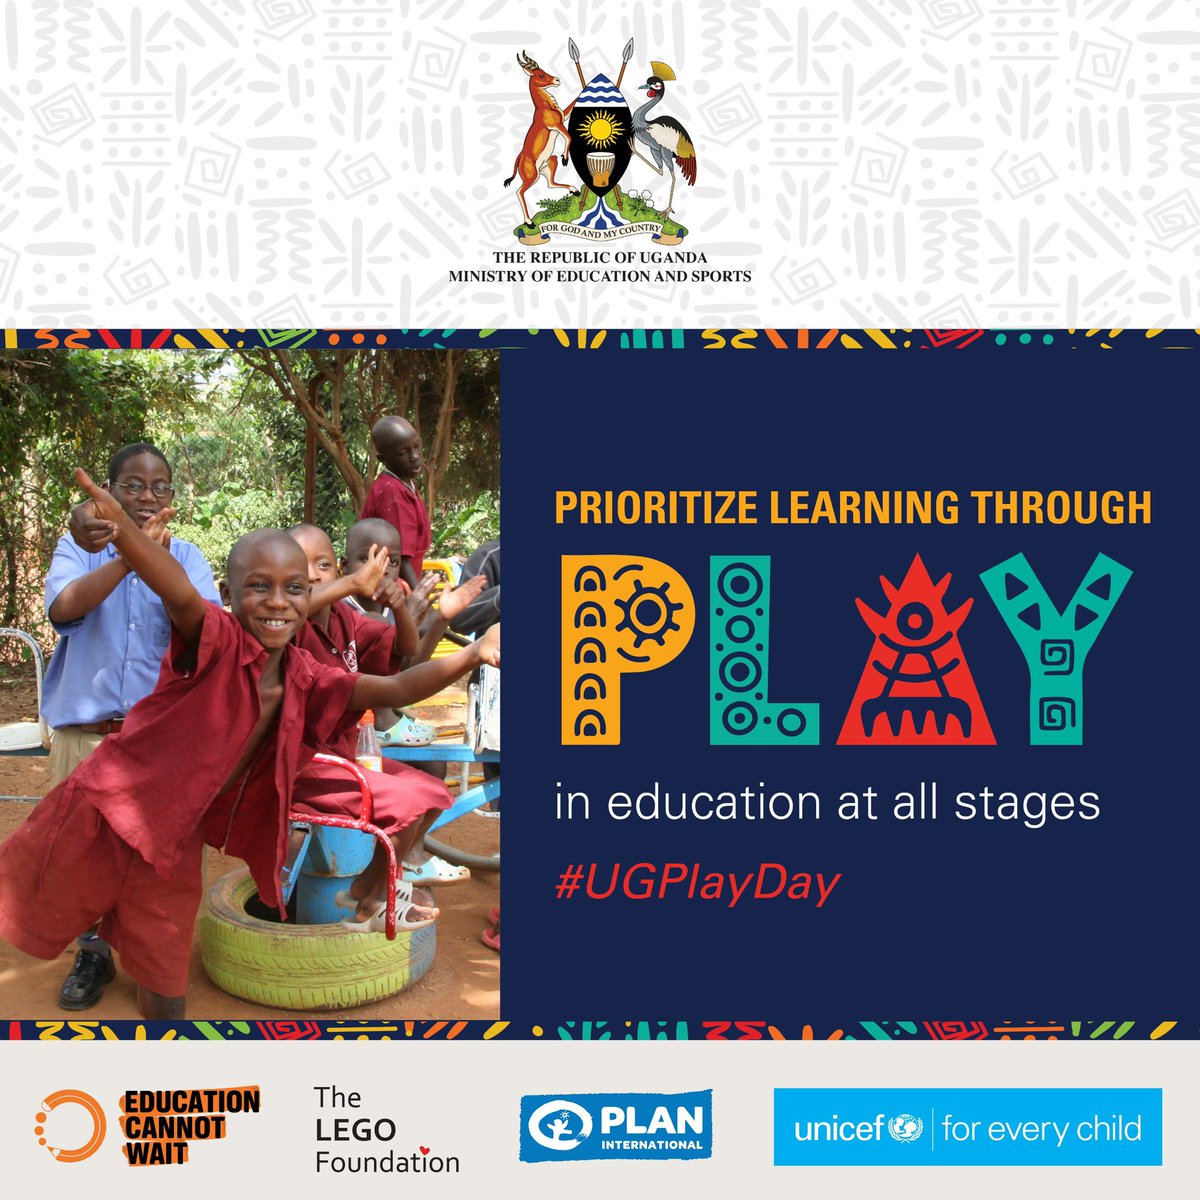 Giving children time to play is crucial for their health physically,mentally, emotionally_and in the long run they are able to relate with their peers.
#UgPlayDay #EducUg
@Educ_SportsUg @UNICEF @PlanUganda @MinofHealthUG @DMU_Uganda